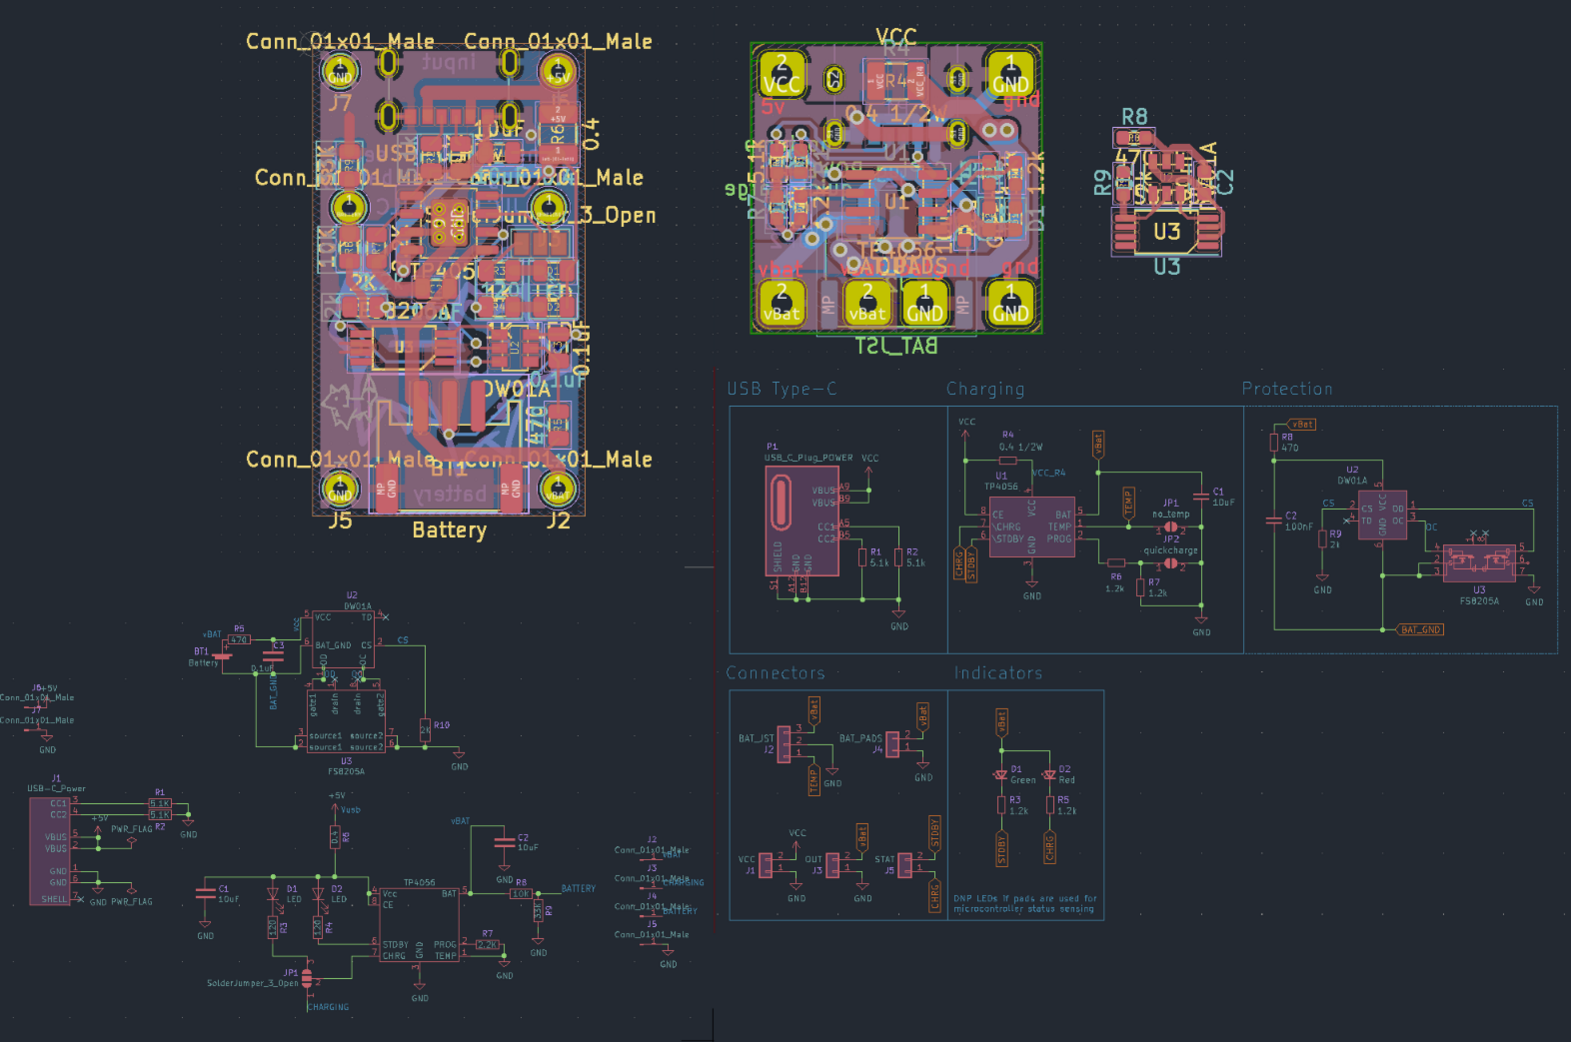 Comparison of two PCB designs, the one on the left is older, the schematic is an absolute mess and the PCB is a bit larger. The right redesign is a smaller square, and has a very nicely organized schema